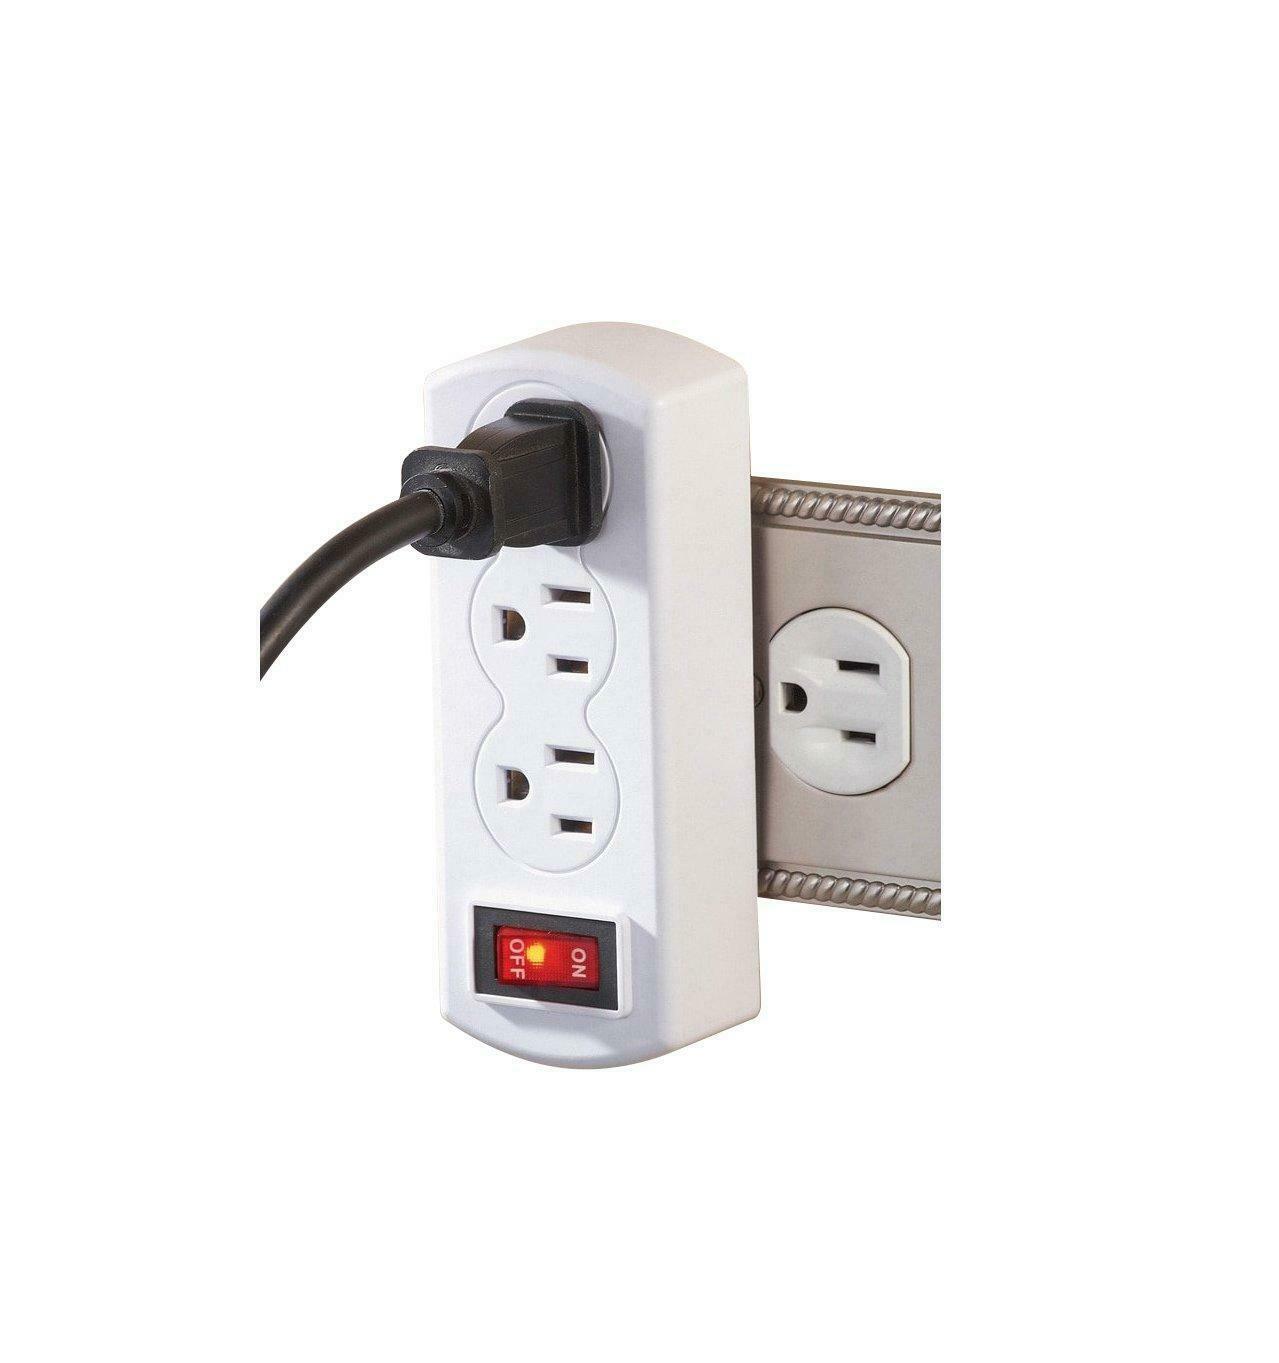 outlet with on off switch